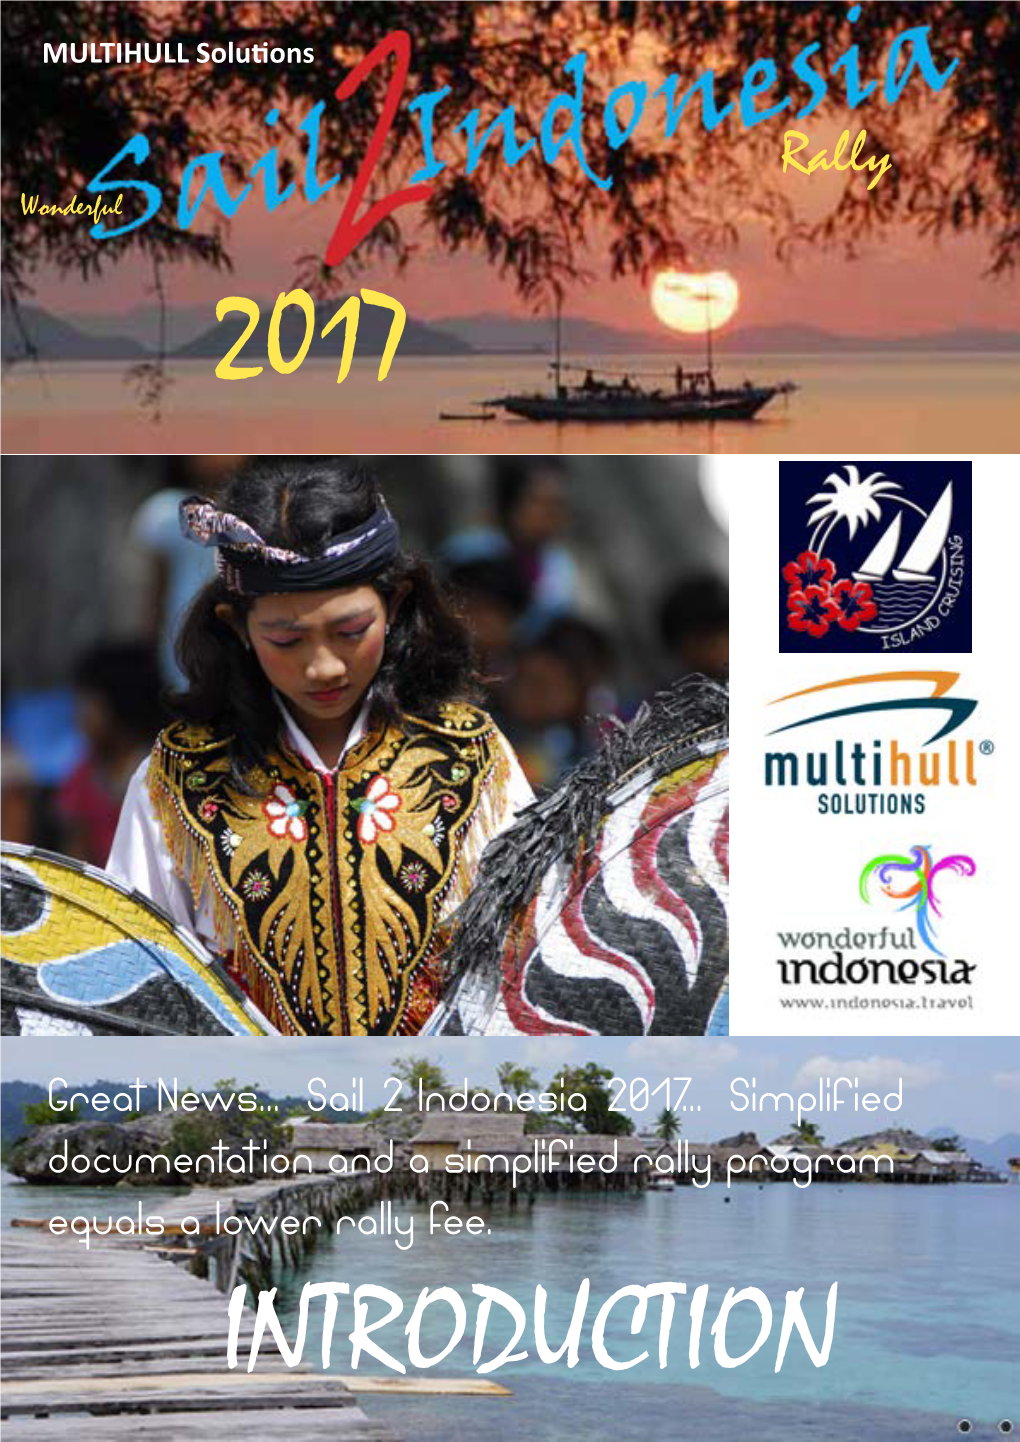 Great News... Sail 2 Indonesia 2017... Simplified Documentation and a Simplified Rally Program Equals a Lower Rally Fee